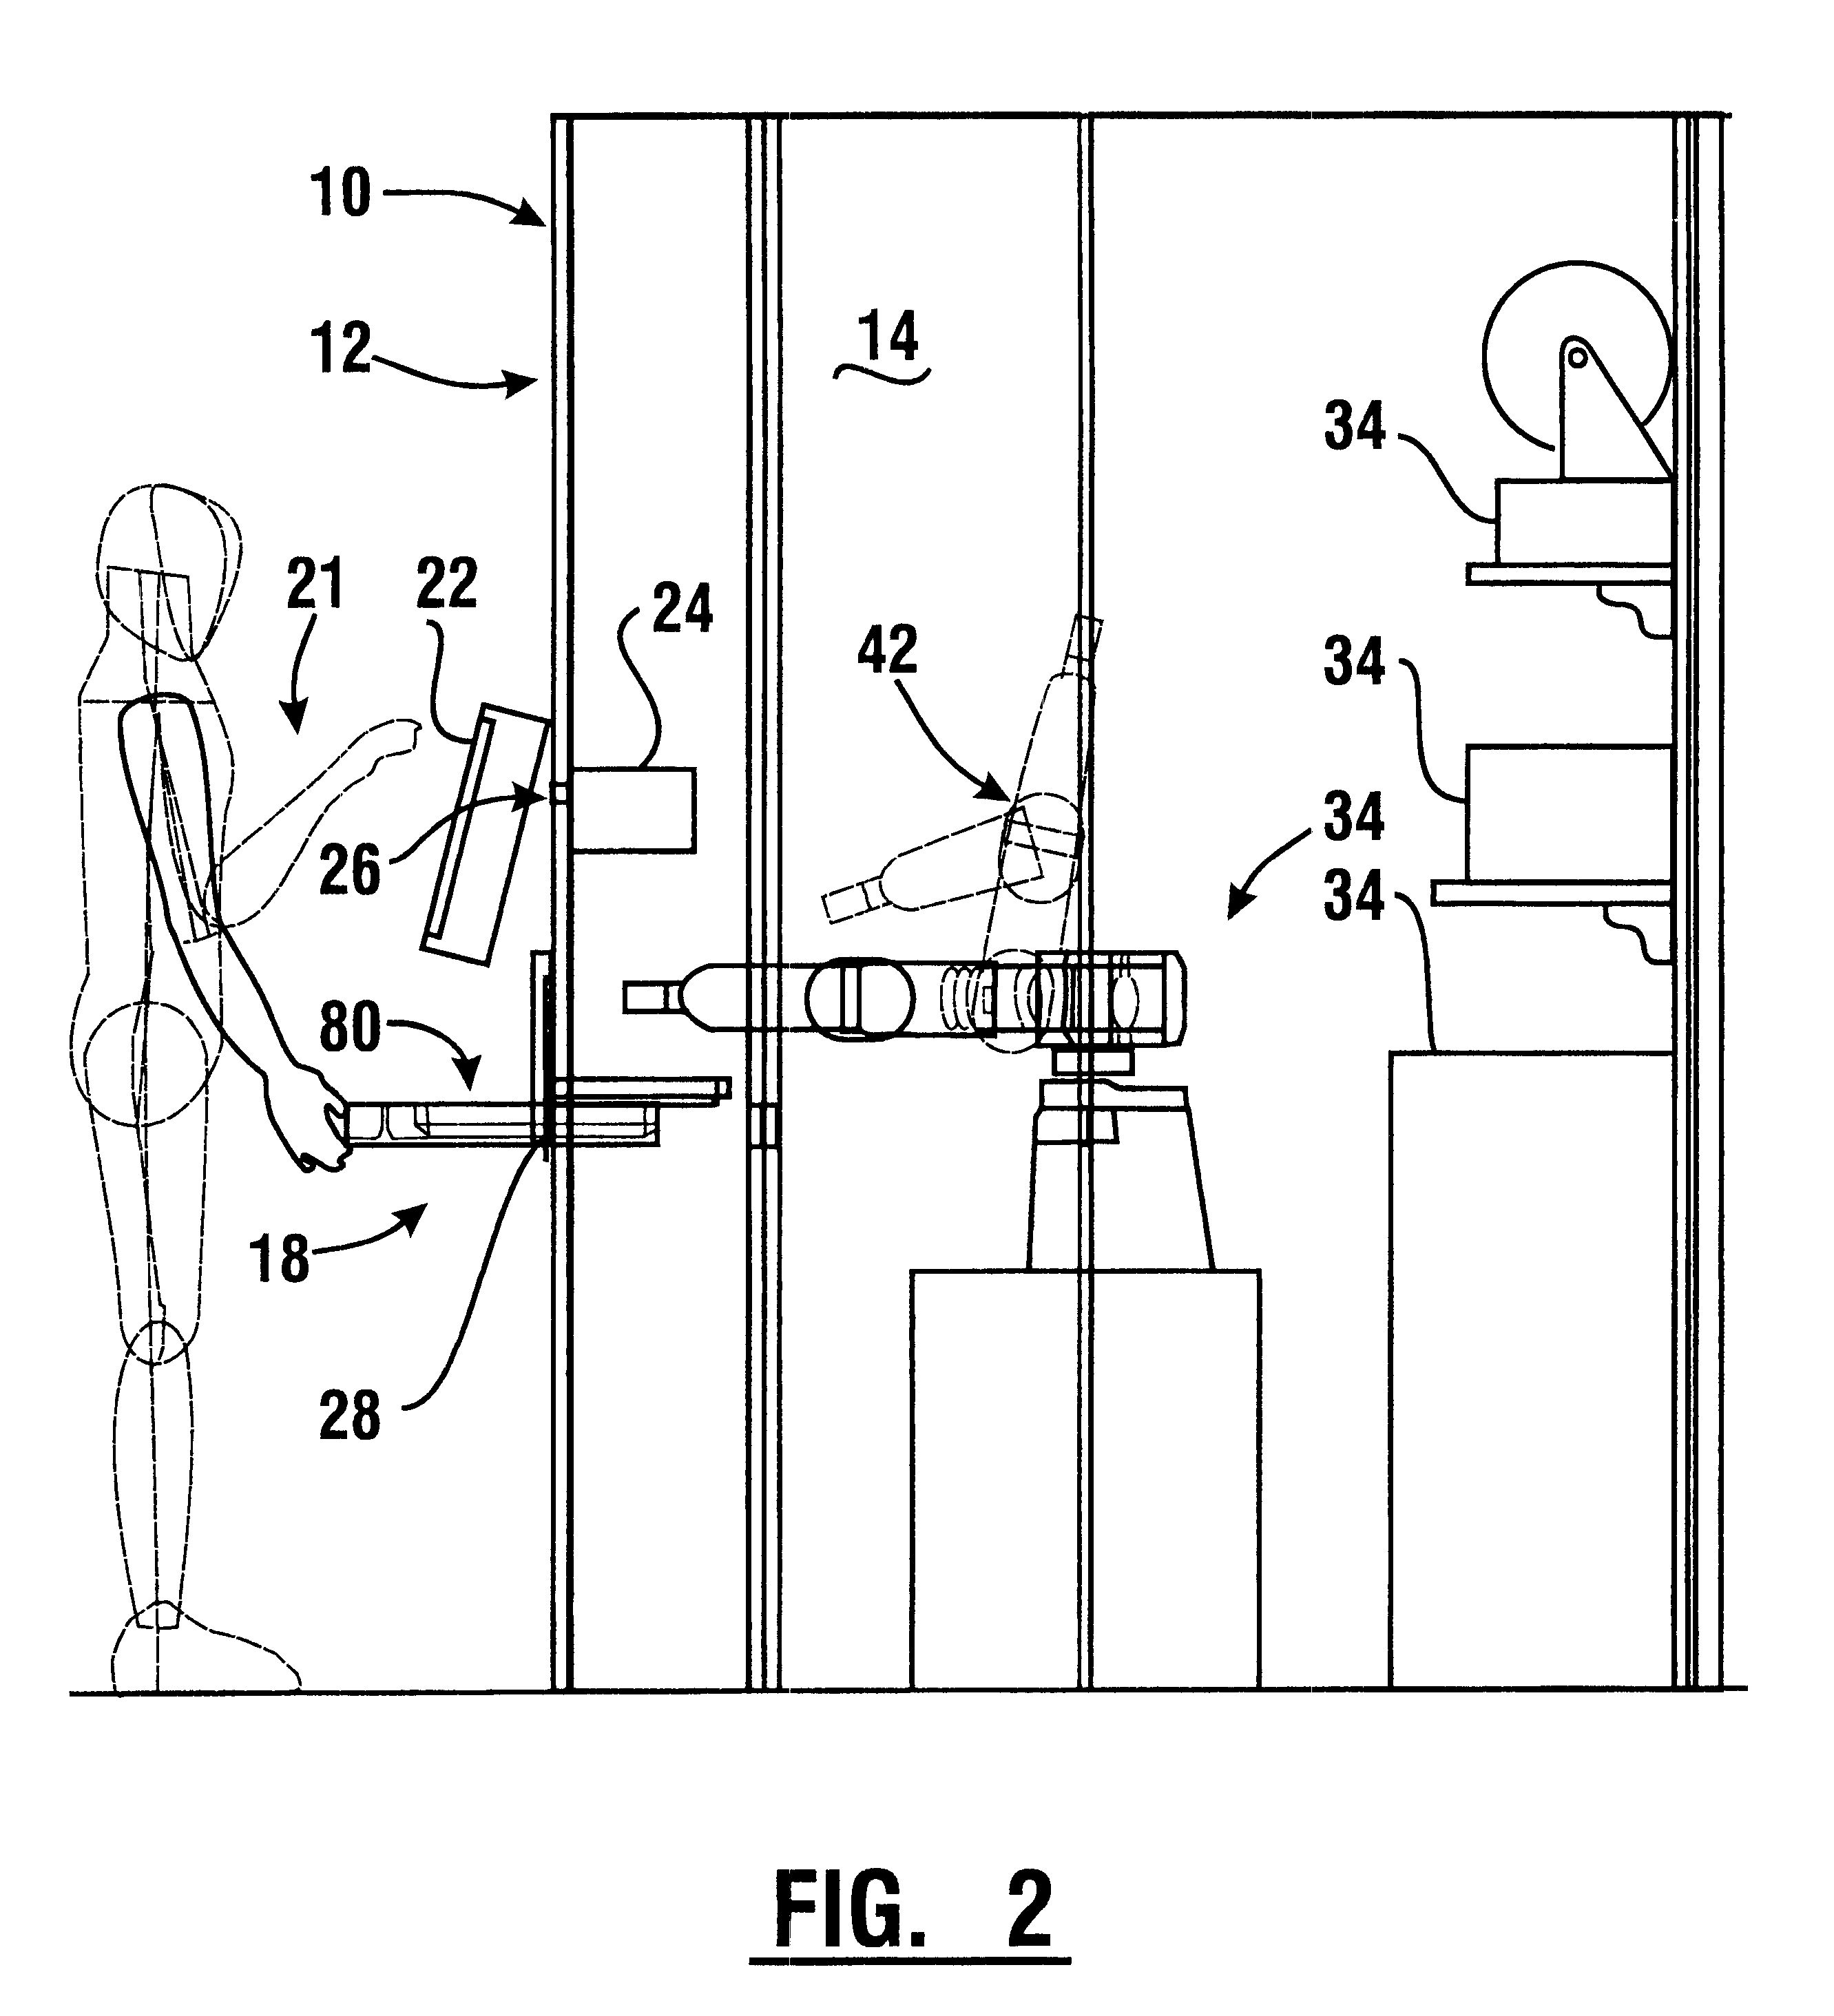 Automated transaction system and method